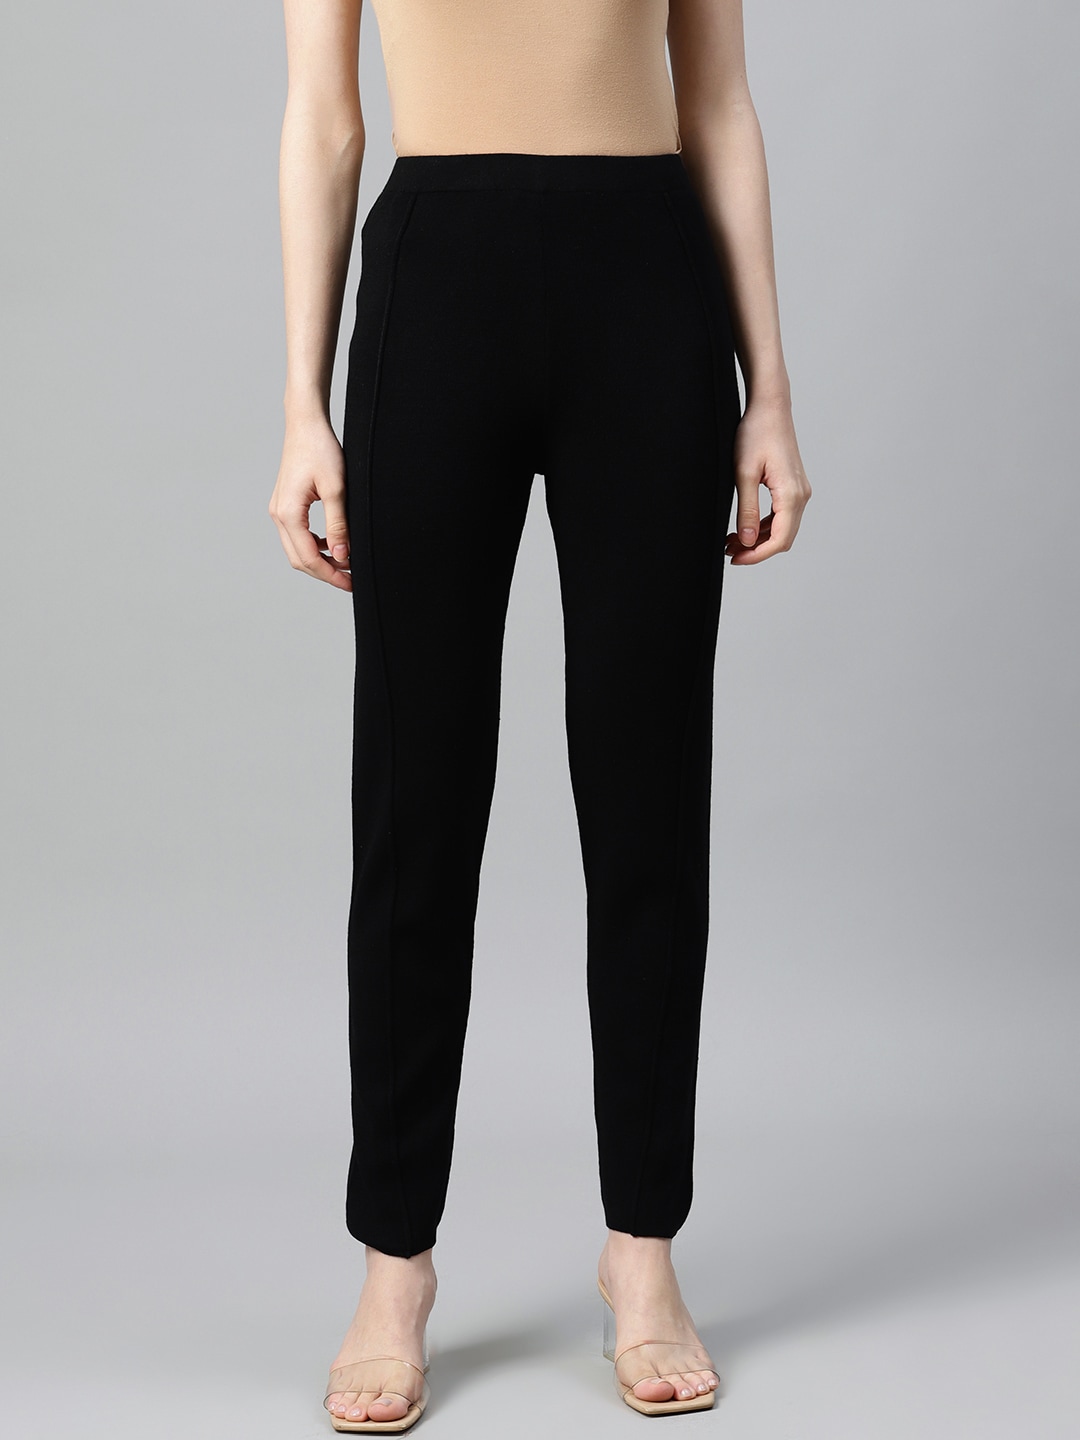 W Women Black Solid Ankle-Length Winter Leggings Price in India